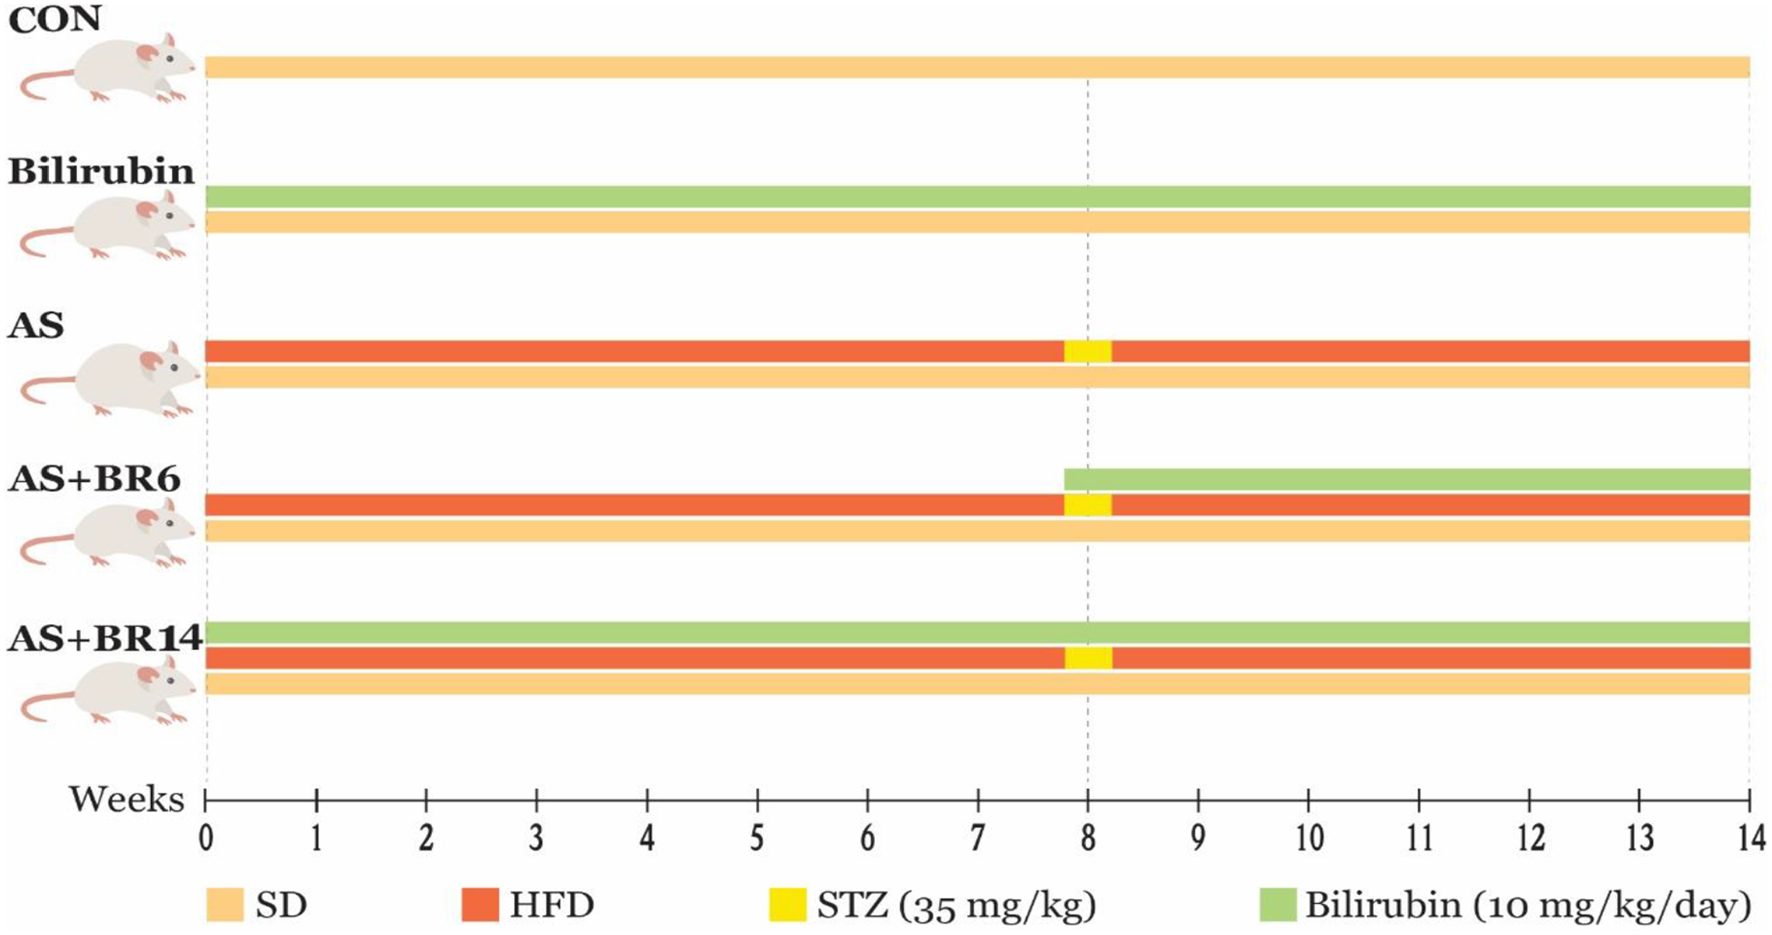 Protective and curative effects of unconjugated bilirubin on gene expression of LOX-1 and iNOS in the heart of rats receiving high-fat diet and low dose streptozotocin: a histomorphometric approach